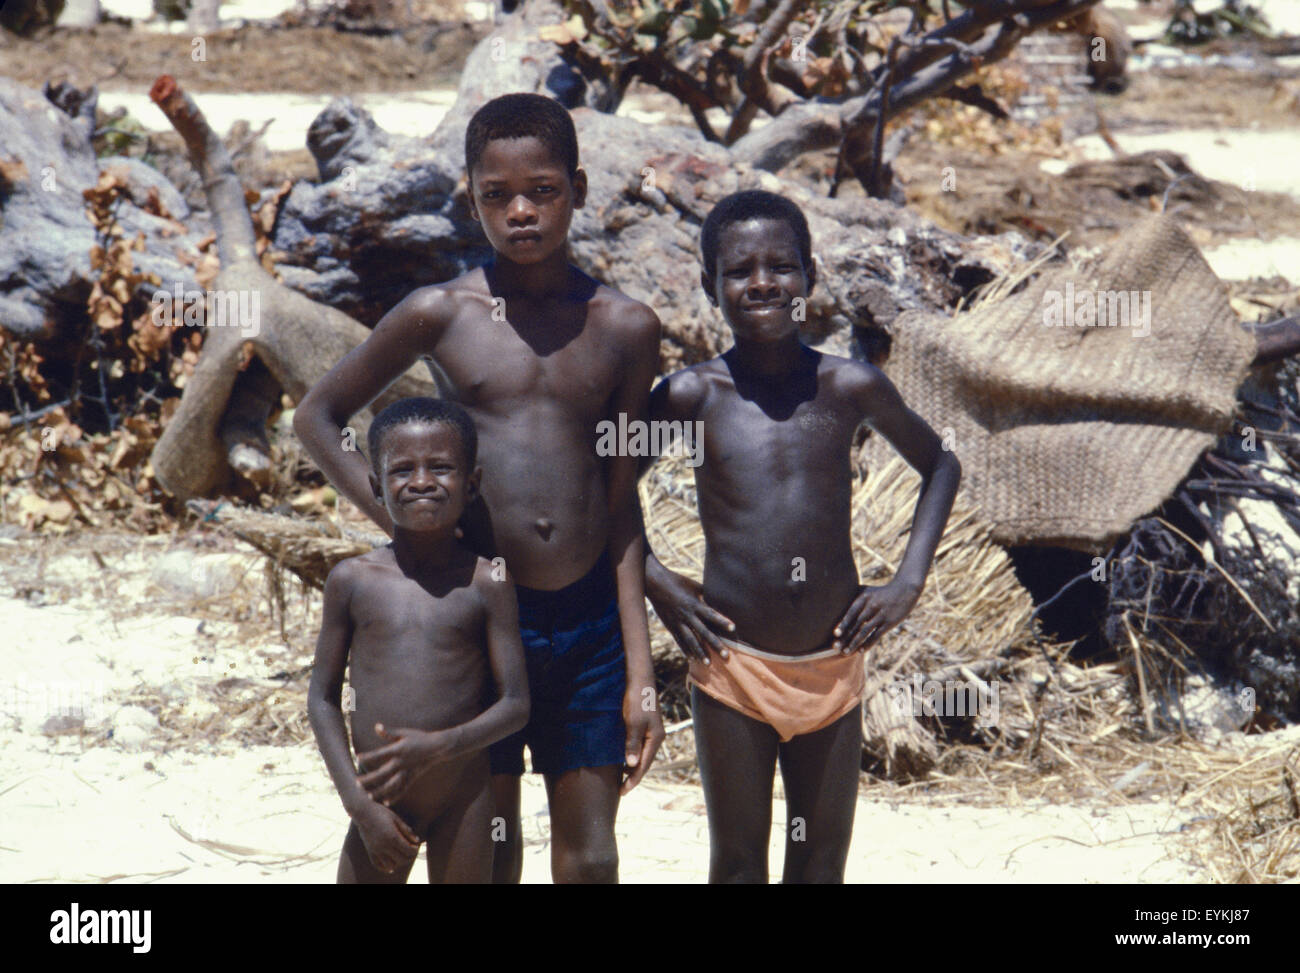 Three boys on the island of Île-à-Vache, Haiti, who survived Hurricane Allen in 1980. Stock Photo